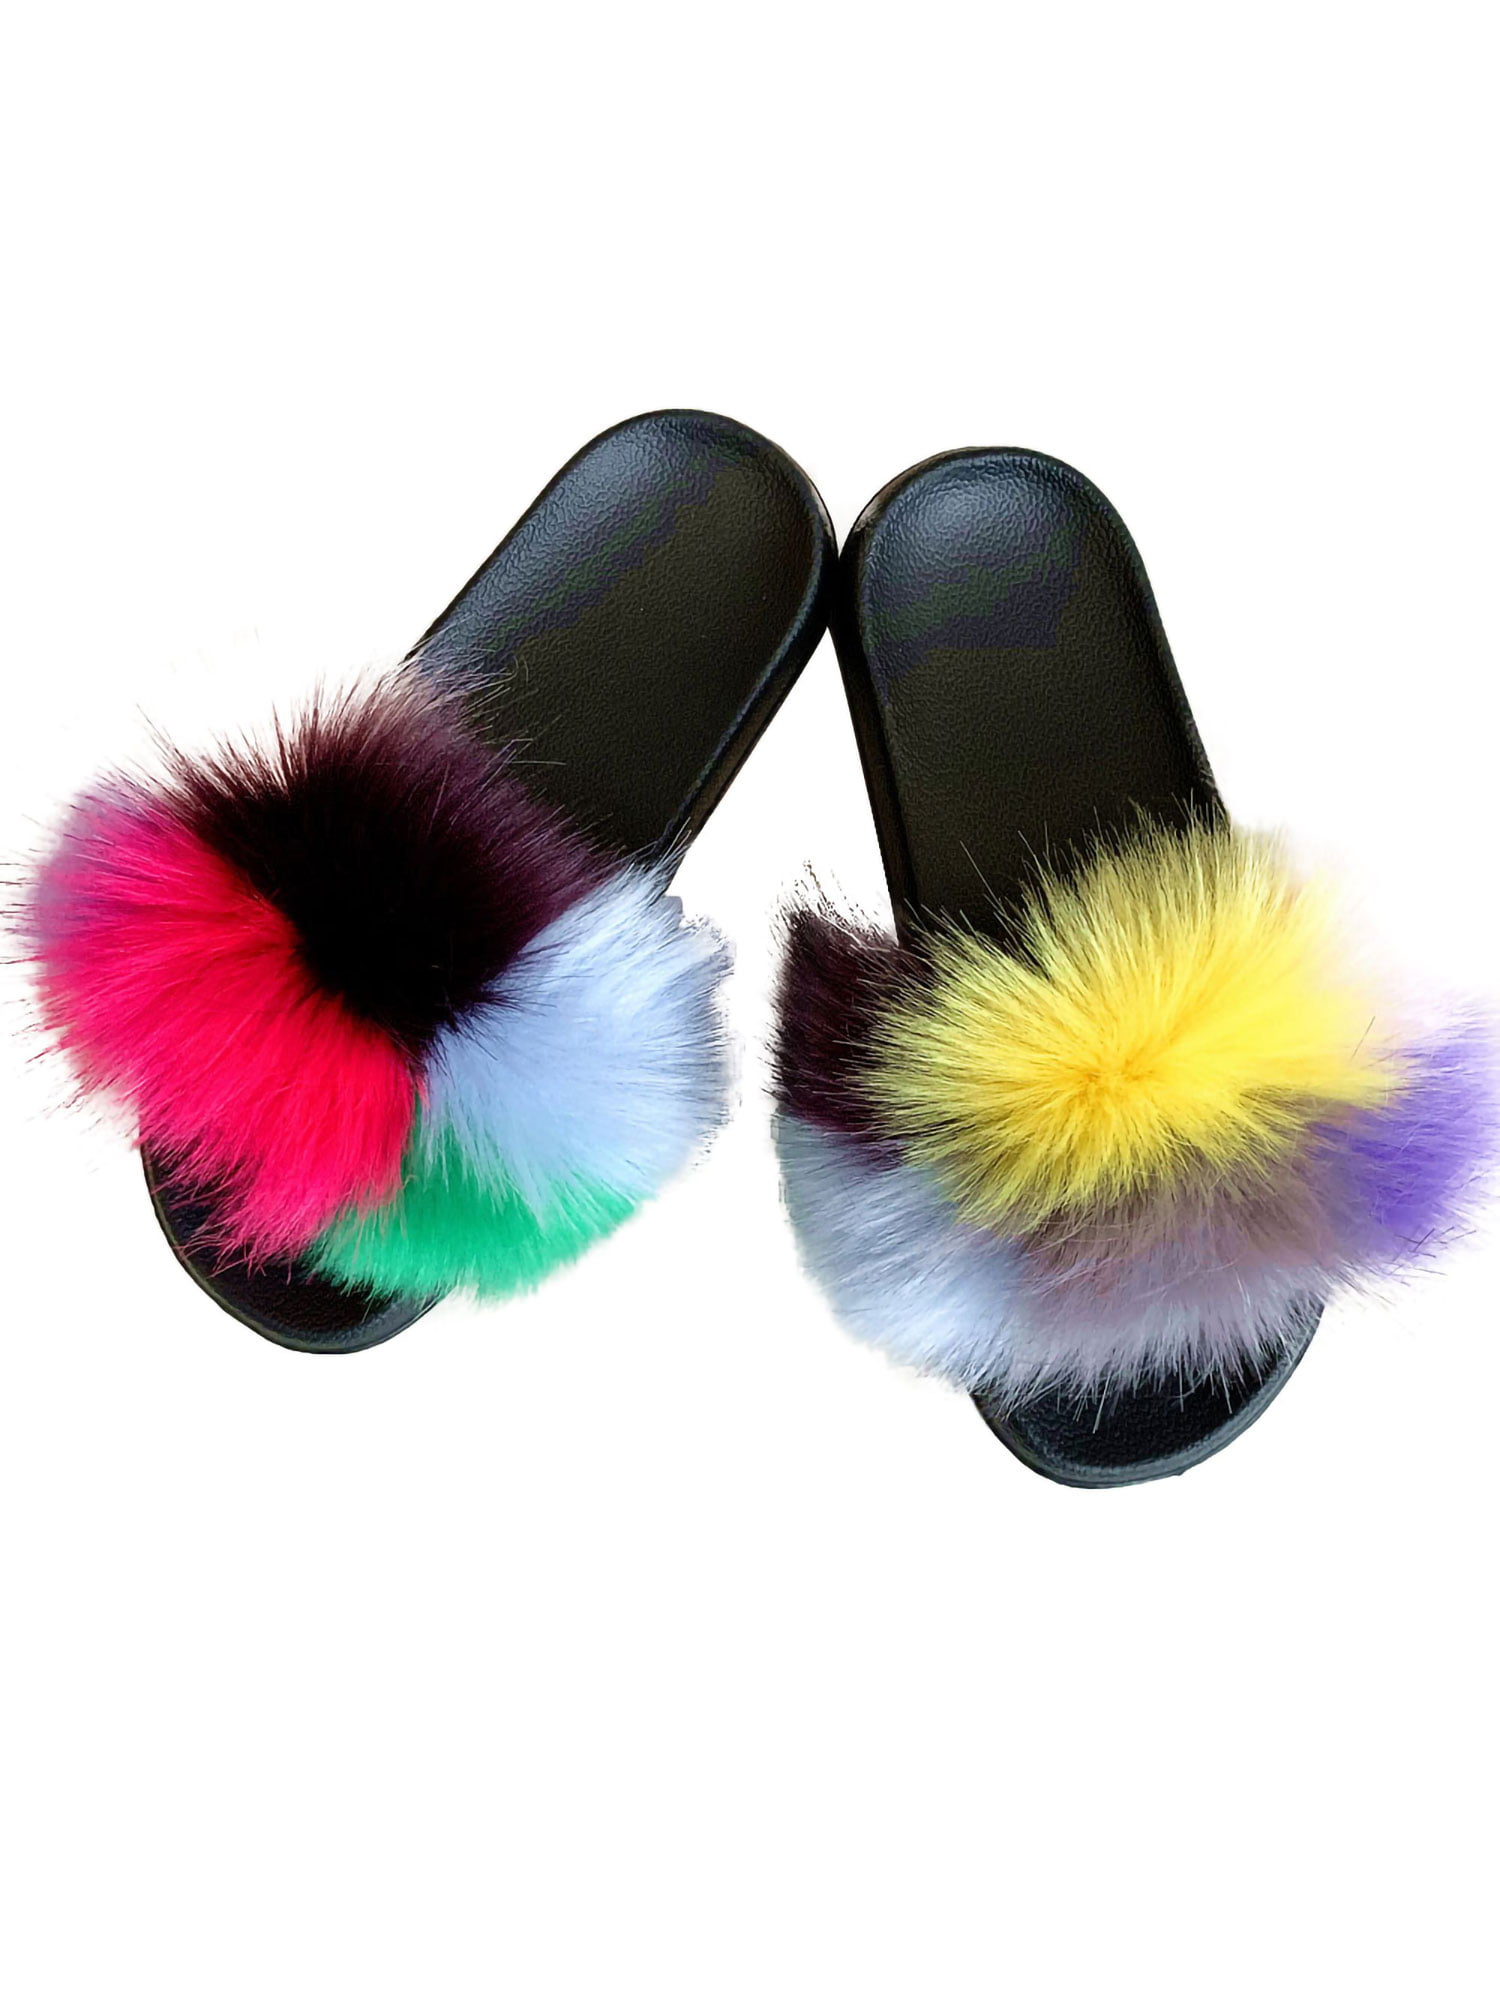 Details about   Faux Fur Slides Fuzzy Fluffy Slippers Flat Soft Sandals Open Toe Ladies Shoes 